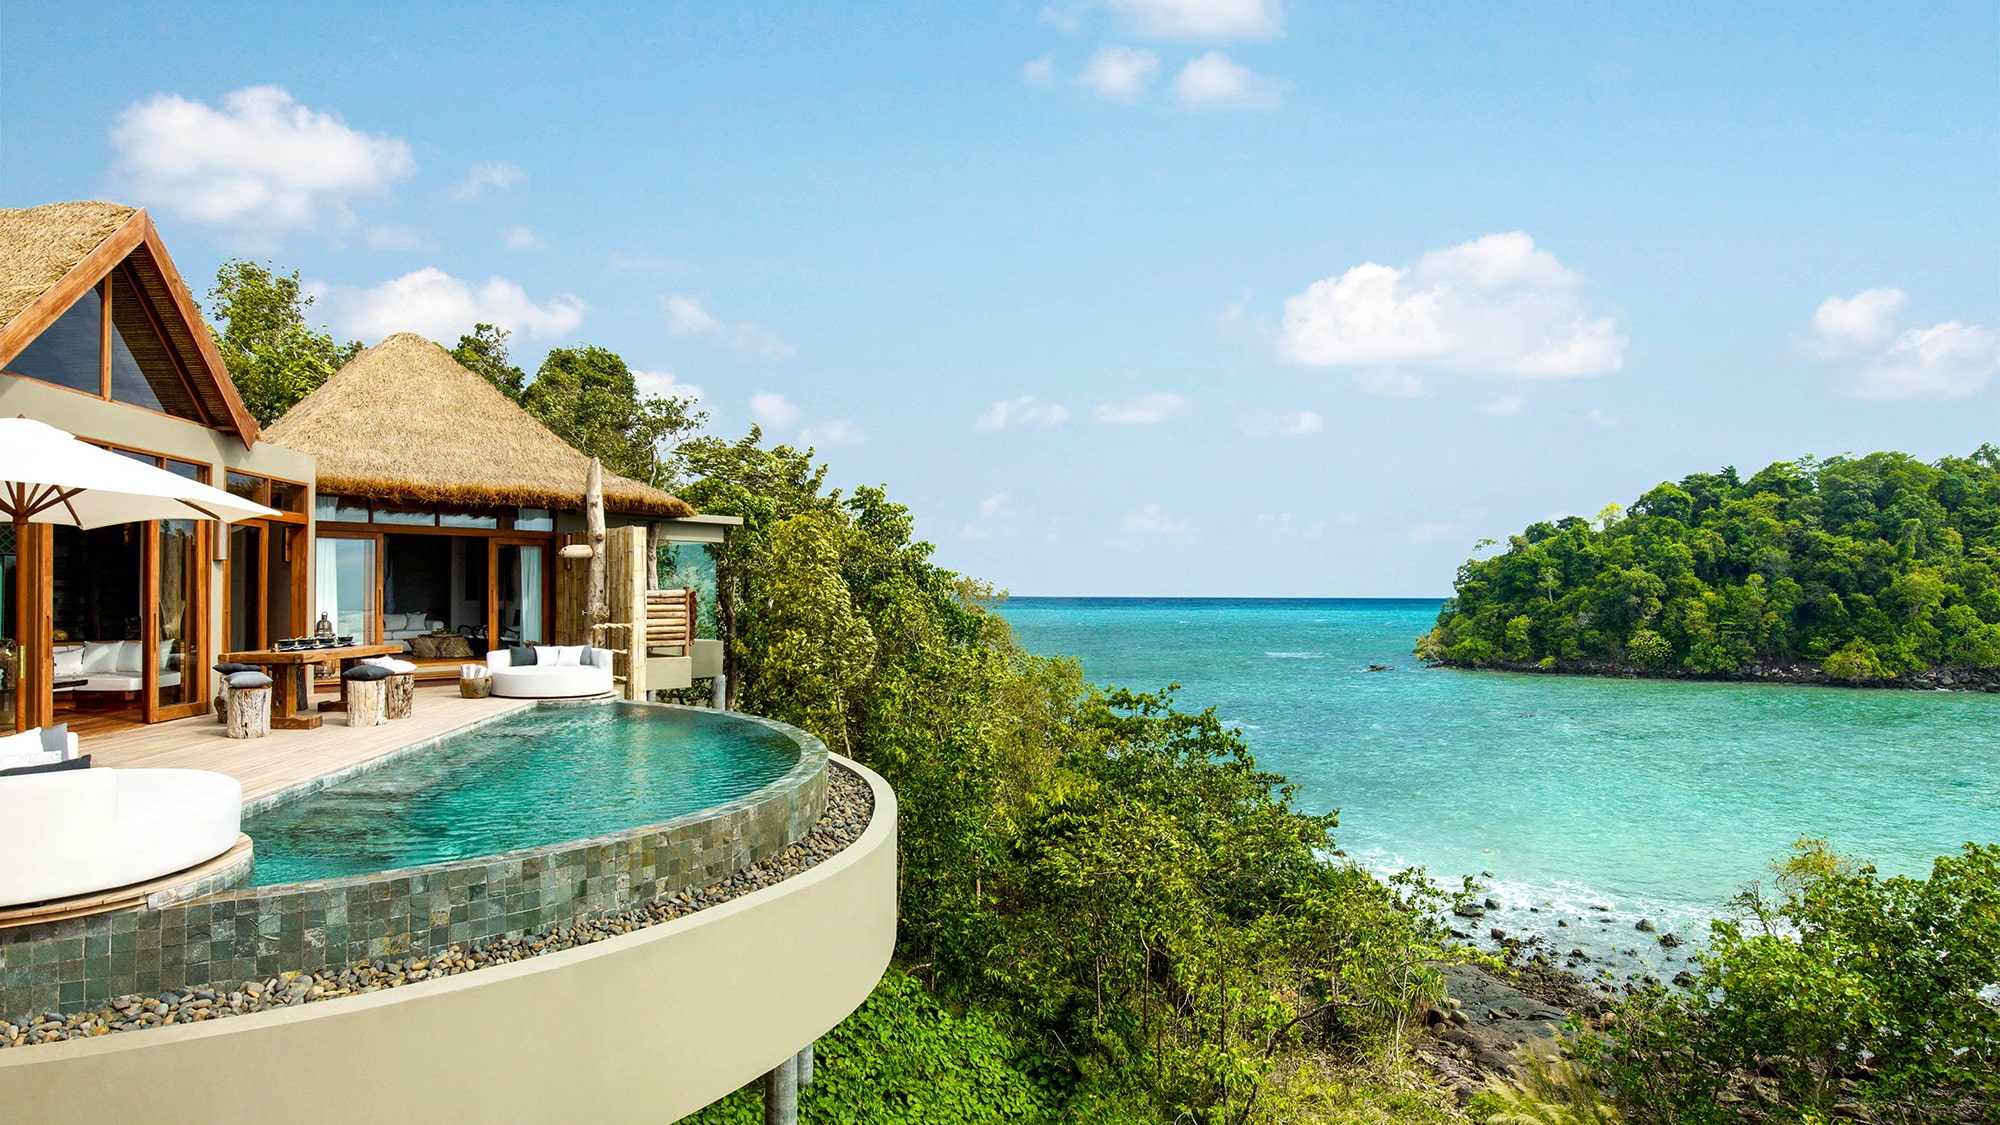 Introducing Song Saa Private Island